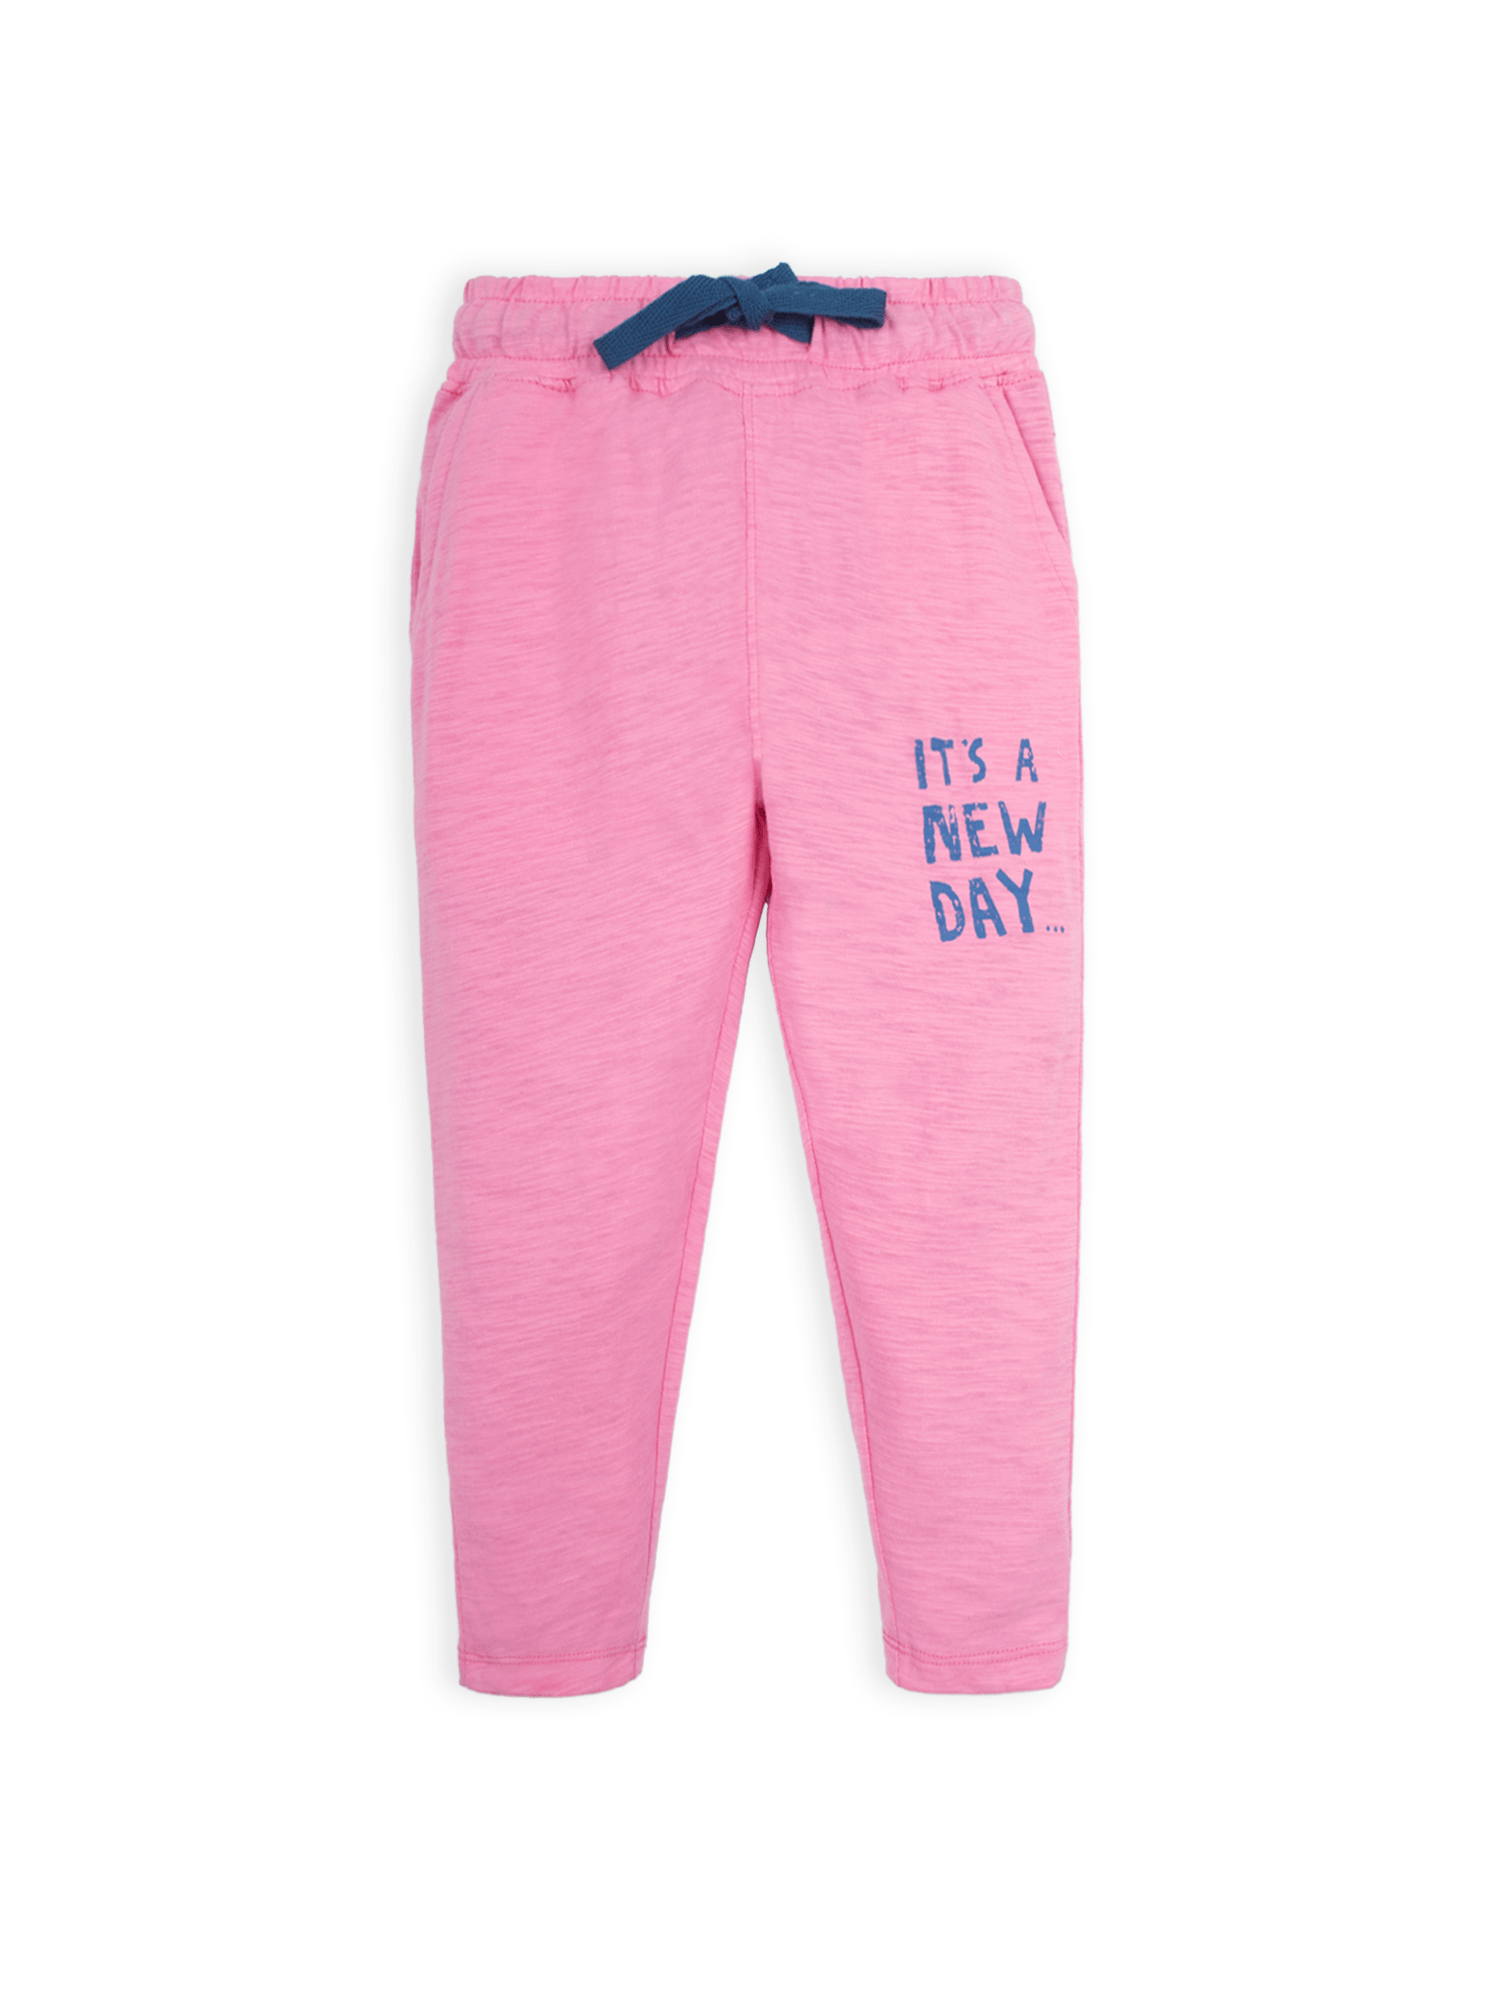 GIRL'S NEW DAY PINK JOGGER 